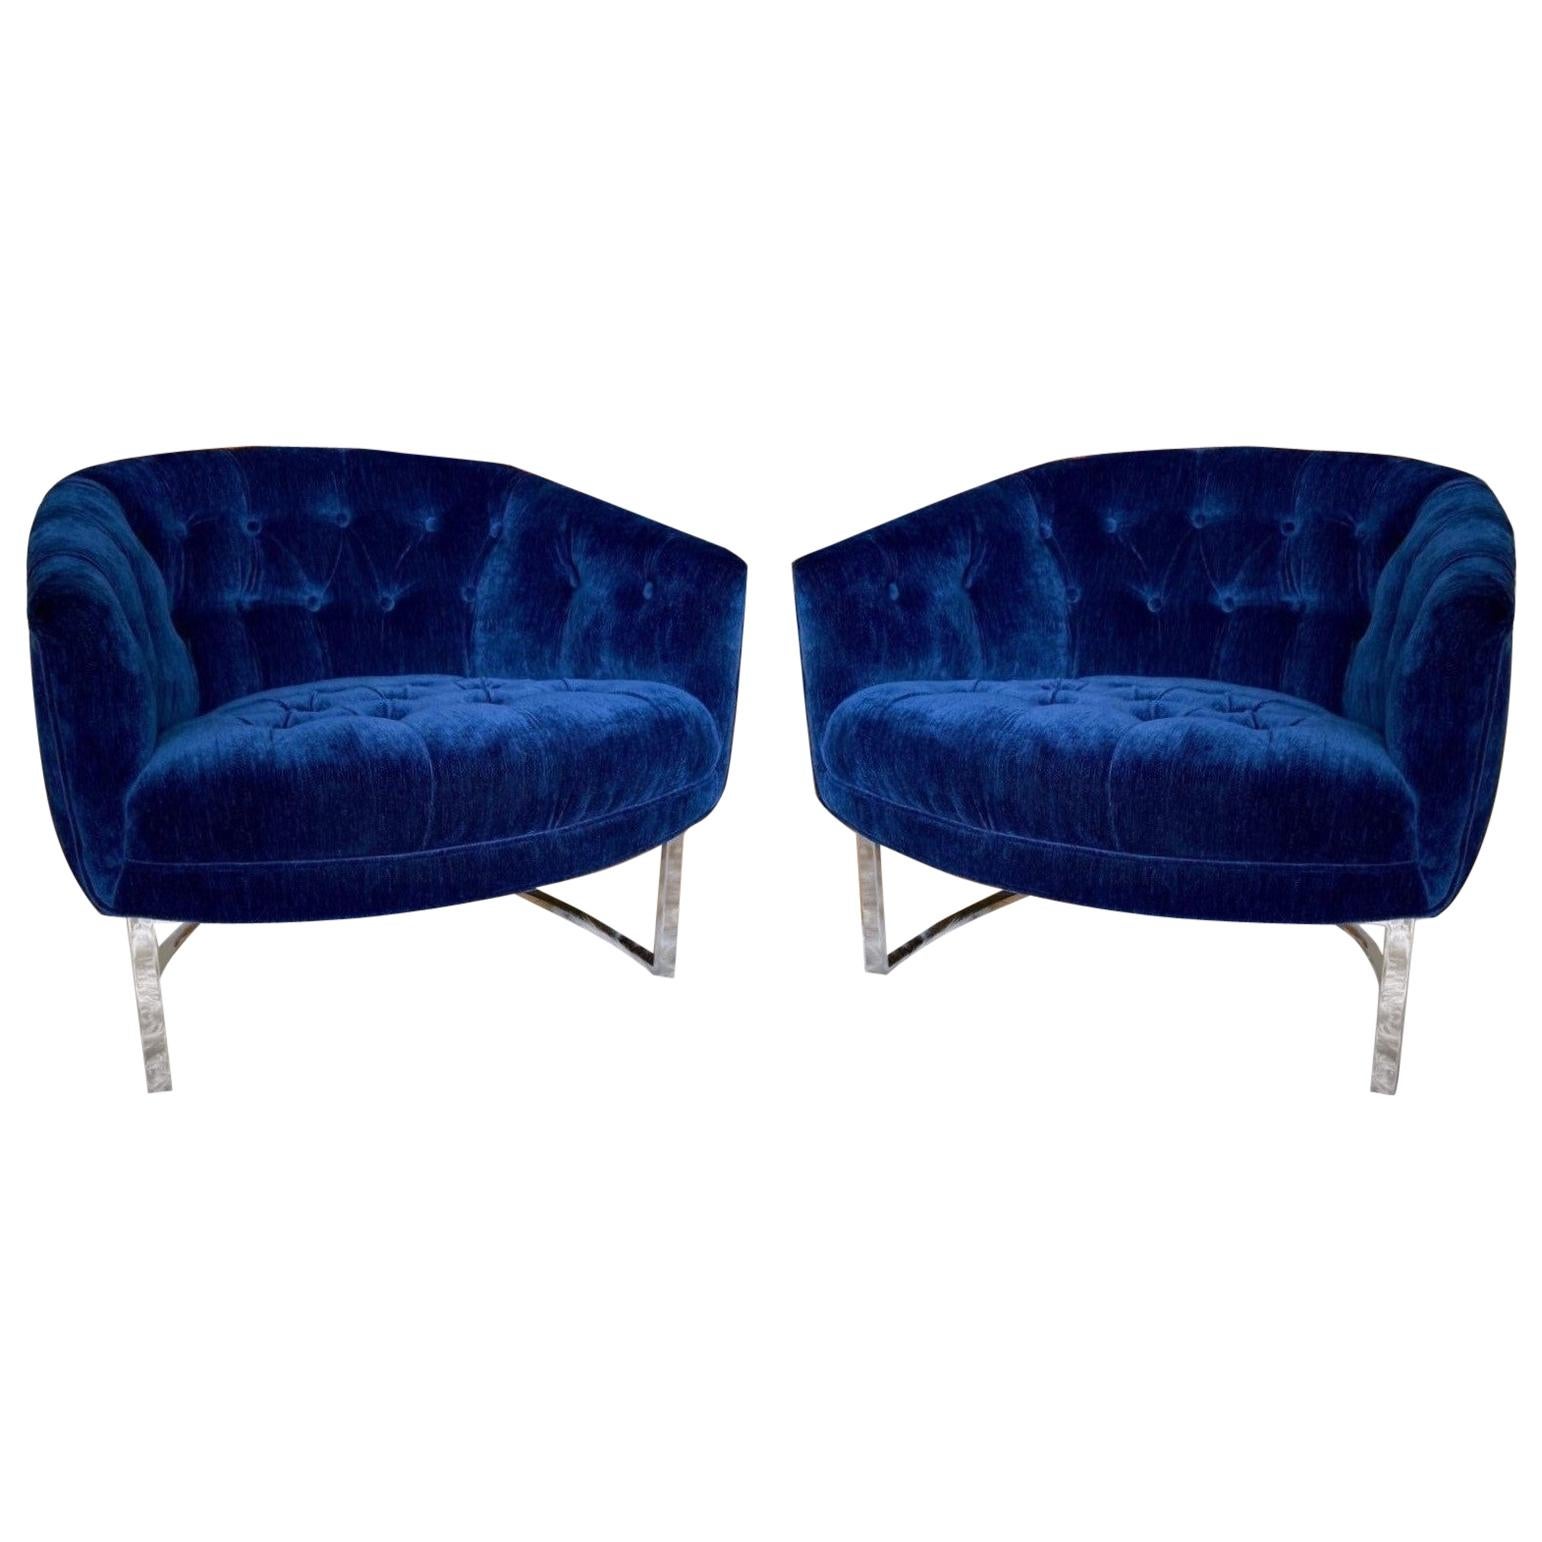 Pair of Milo Baughman Style Blue and Chromed Steel Framed Armchairs, 1970s